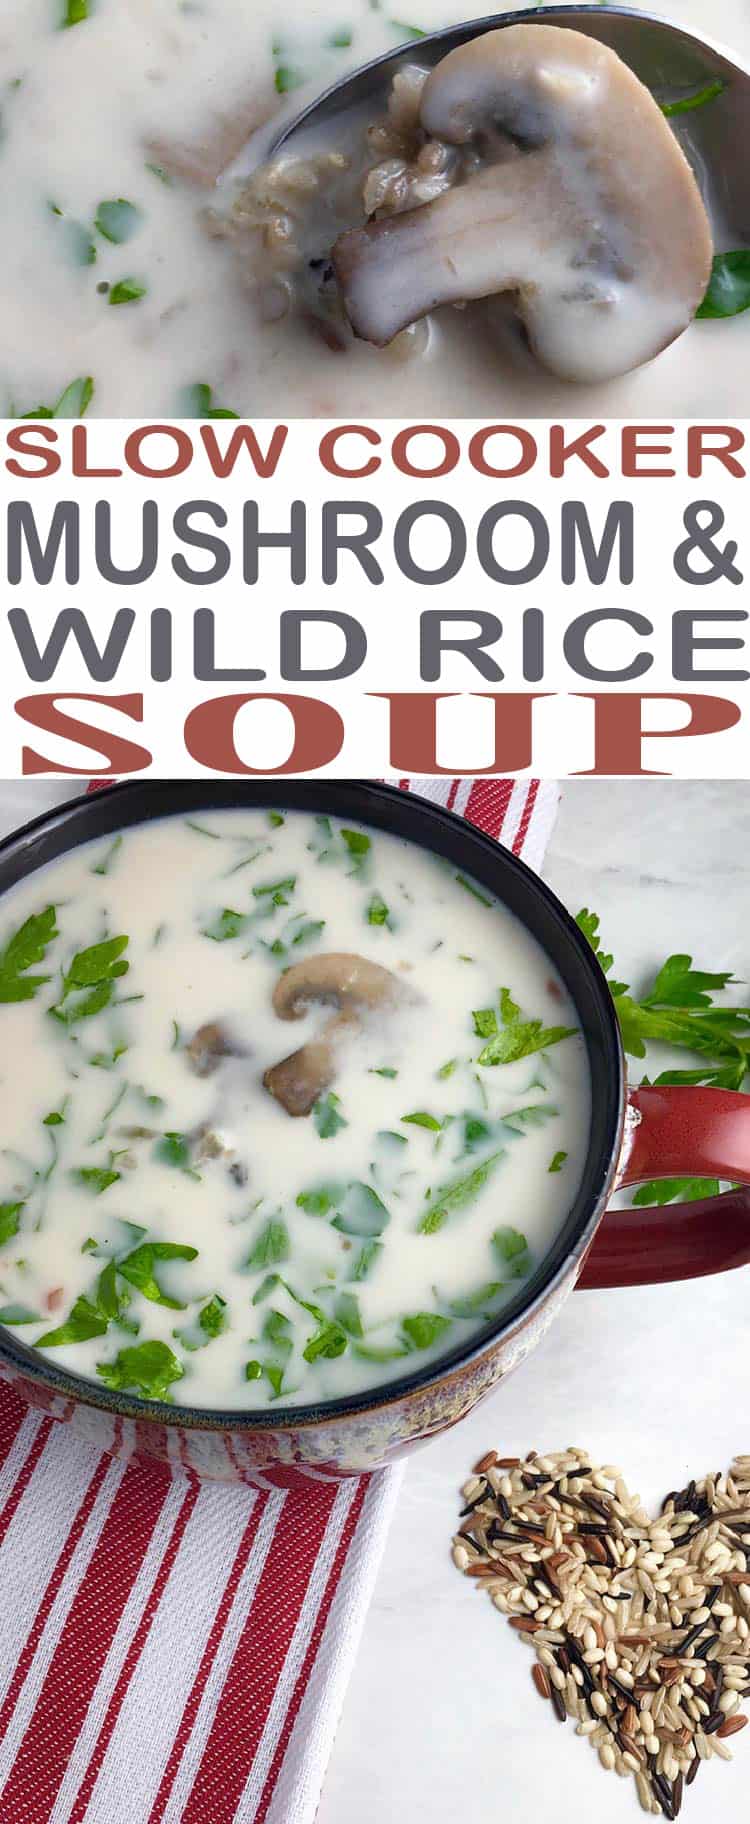 Slow Cooker Mushroom and Wild Rice Soup is warming and a comfort food favorite. The easy slow cooker soup recipe is perfect for a cold day.